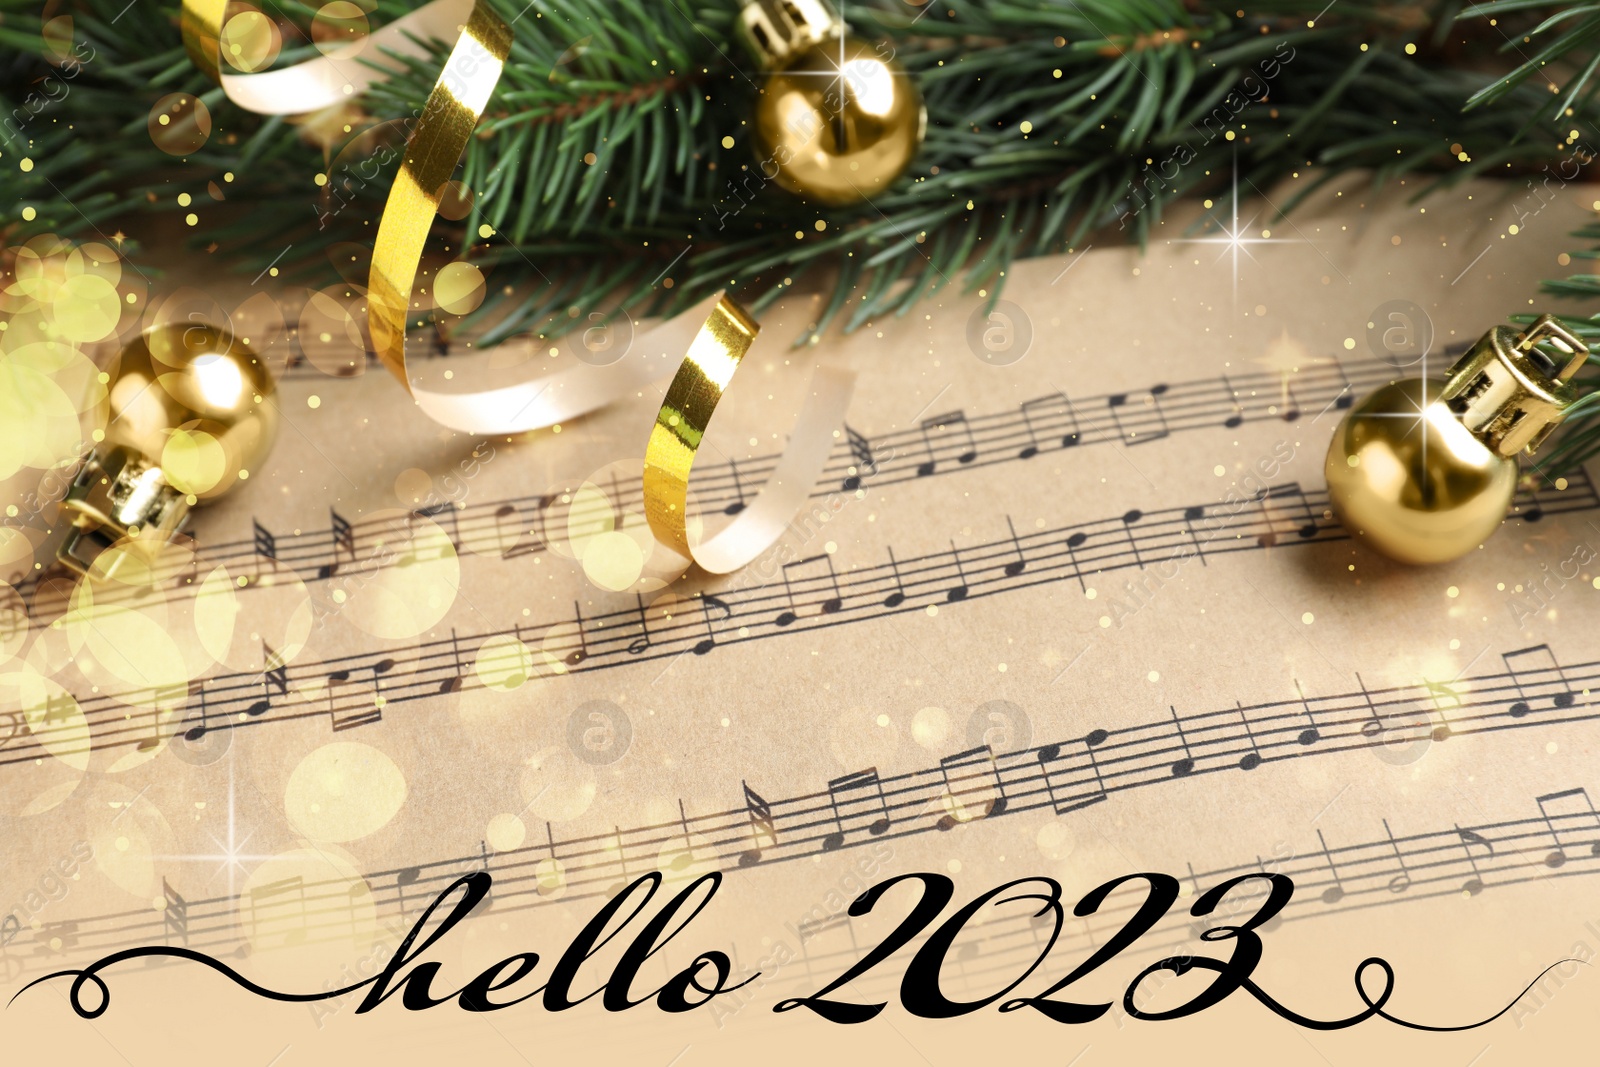 Image of Hello 2023. Fir branches and golden balls on Christmas music sheets, above view